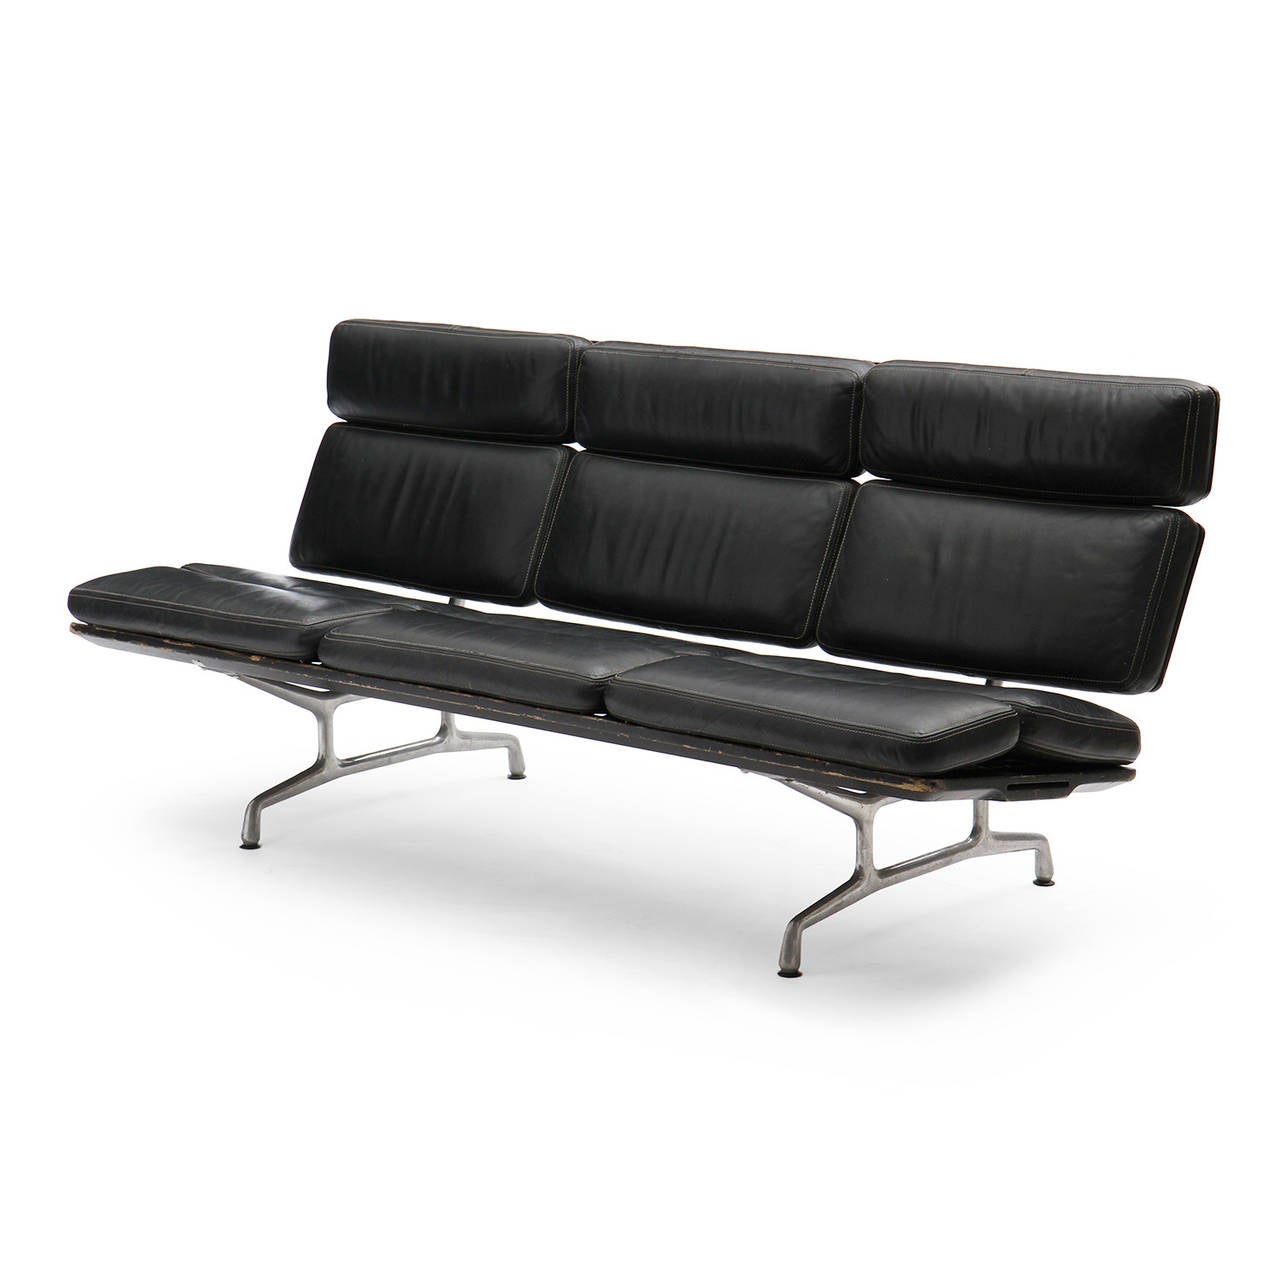 A modernist armless sofa with sectioned black leather upholstery and floating on sculptural polished cast aluminum legs. 